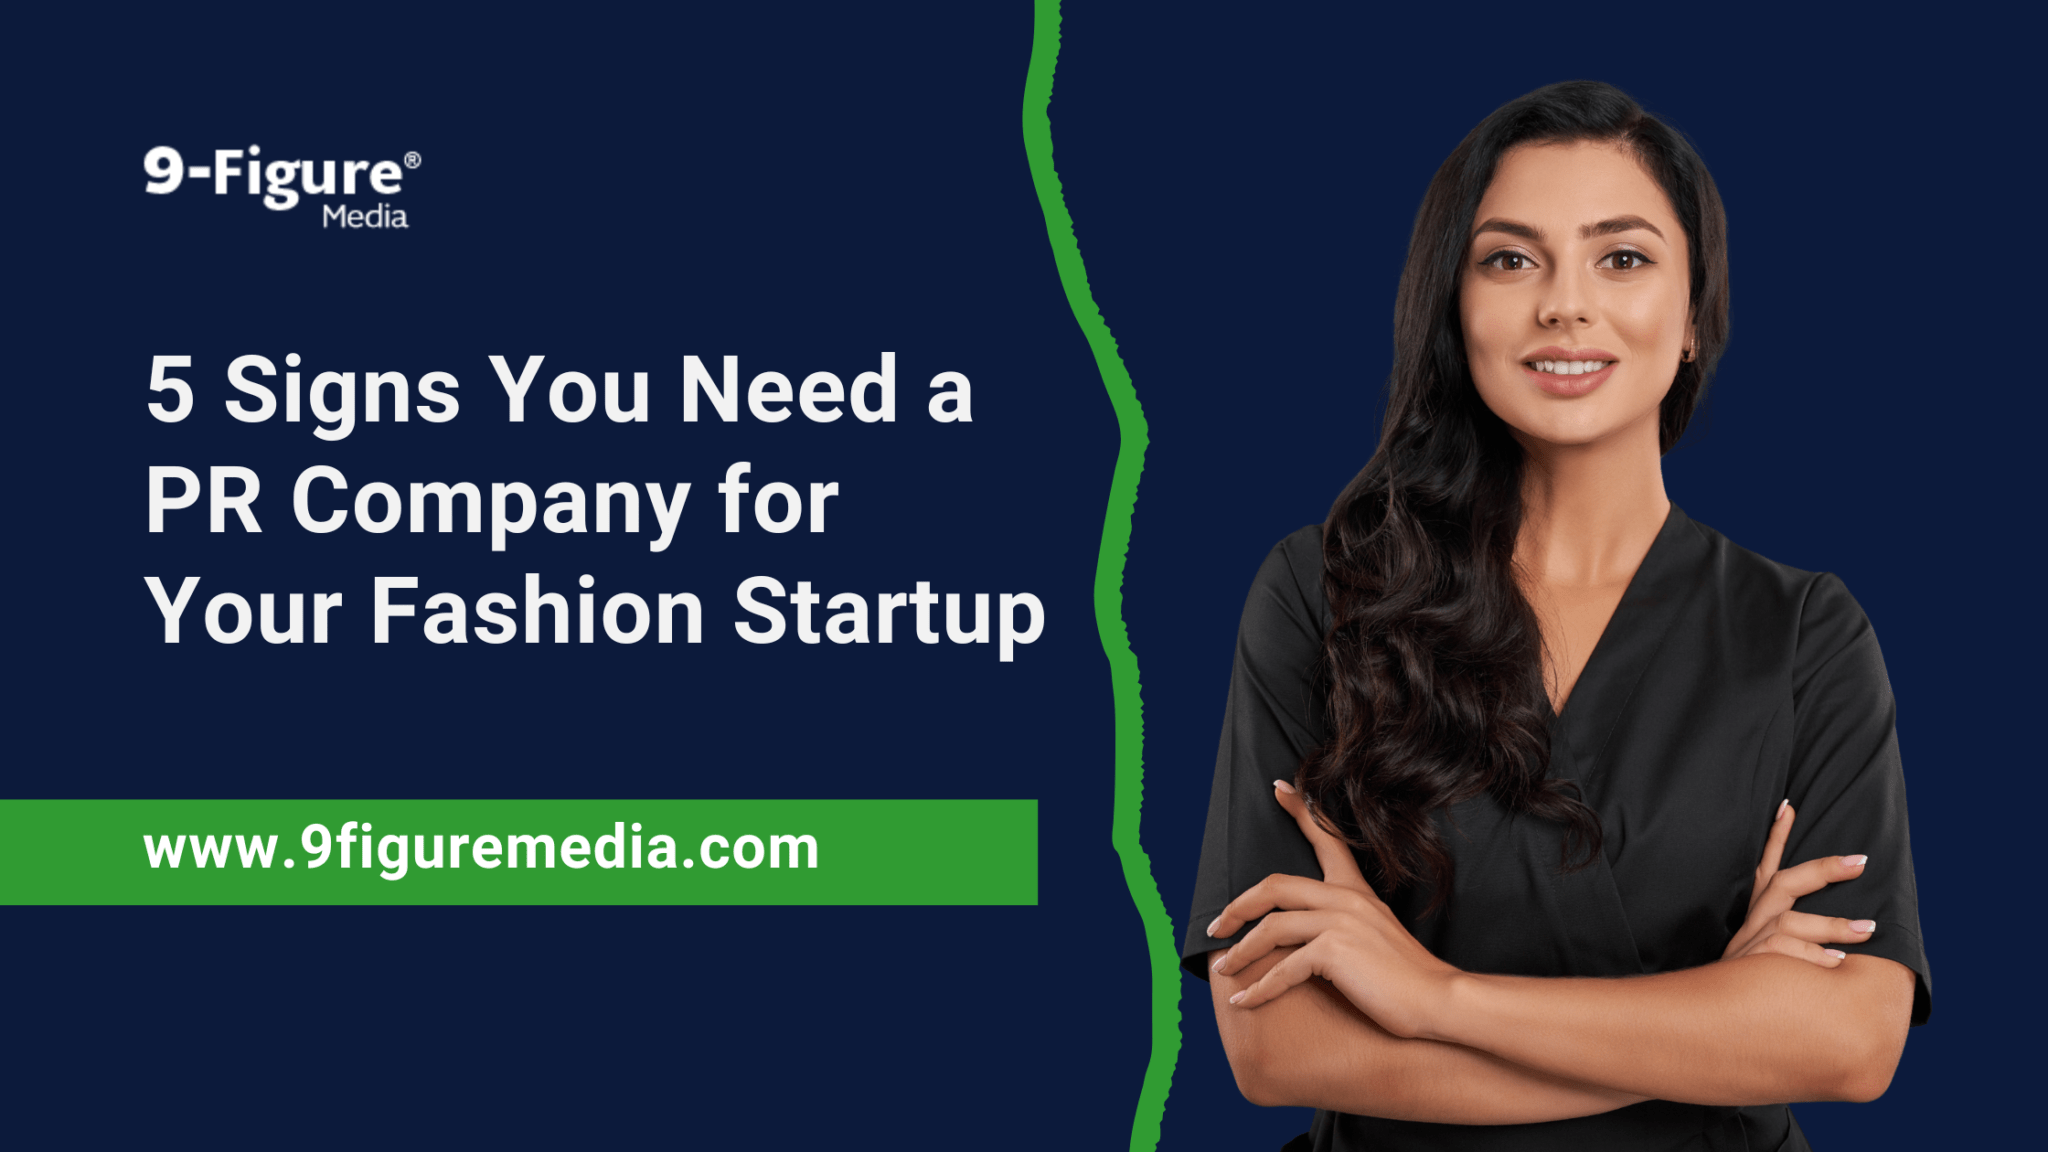 5 Signs You Need a PR Company for Your Fashion Startup